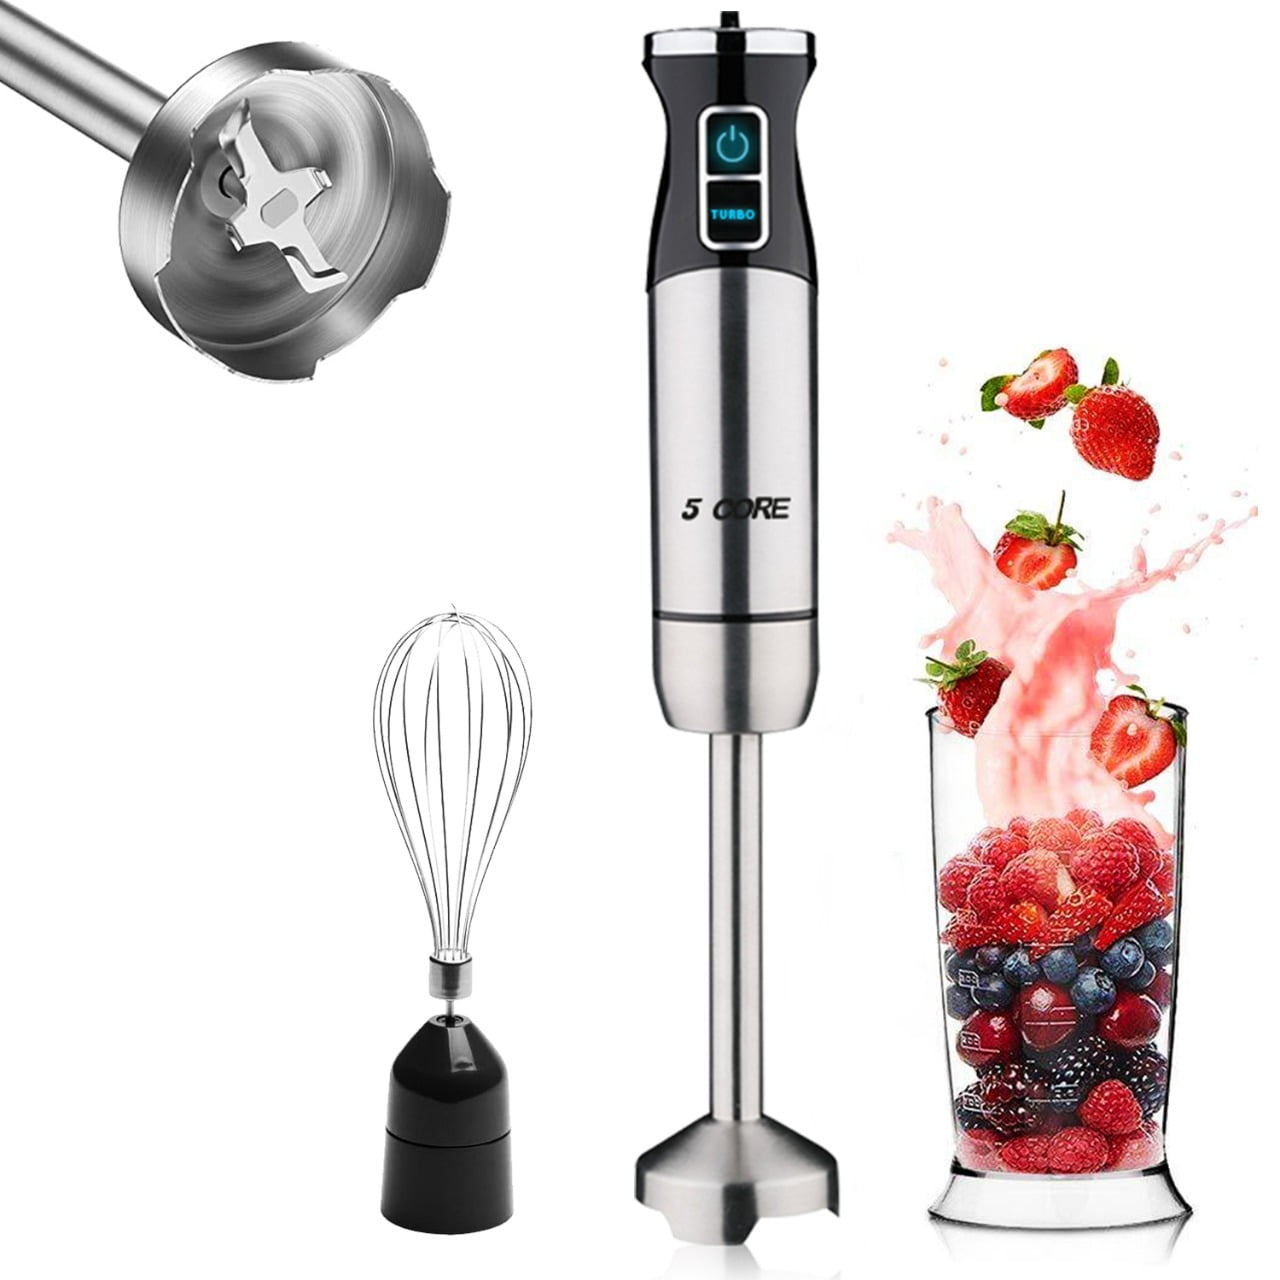 Ergonomically Handle Designed Hand Blender Stainless Steel Blades Choice for Soup IKICH Immersion Blender Set with 800ml BPA-Free Beaker Sauces and Making Soap Smoothies & Baby Food 